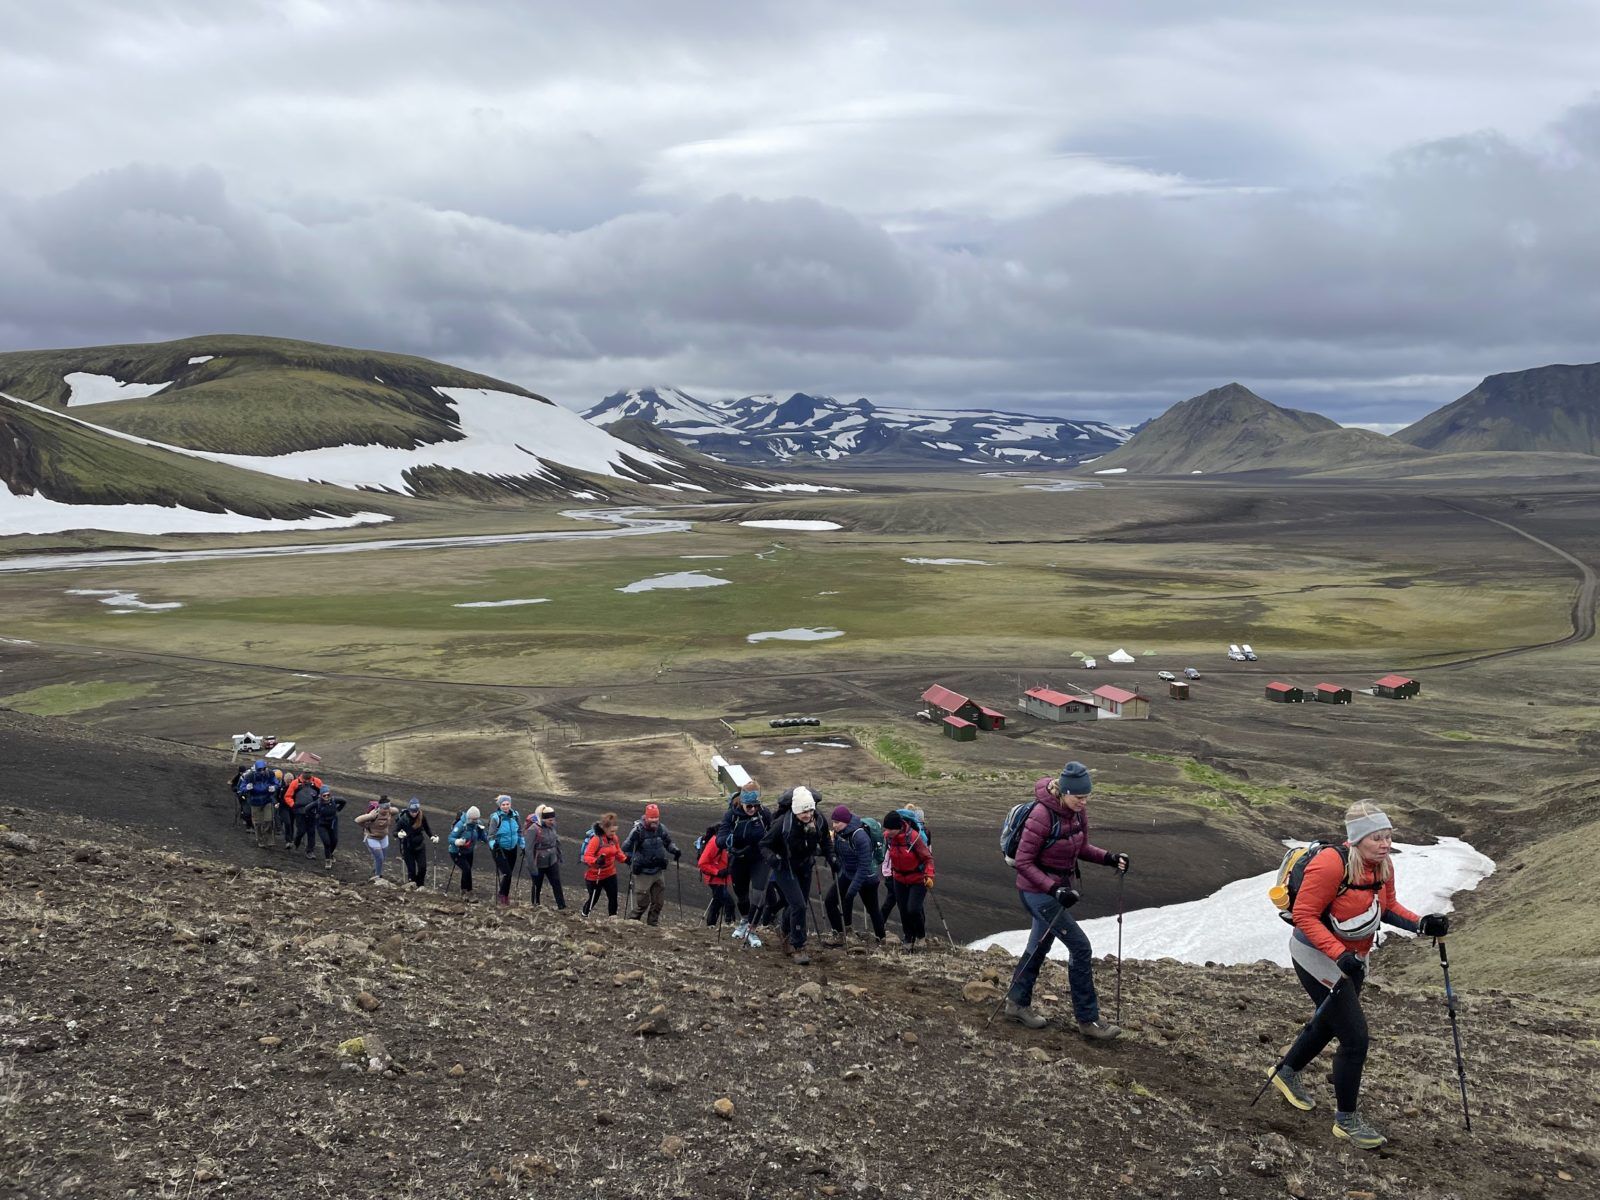 People are hiking in the Icelandic highlands.